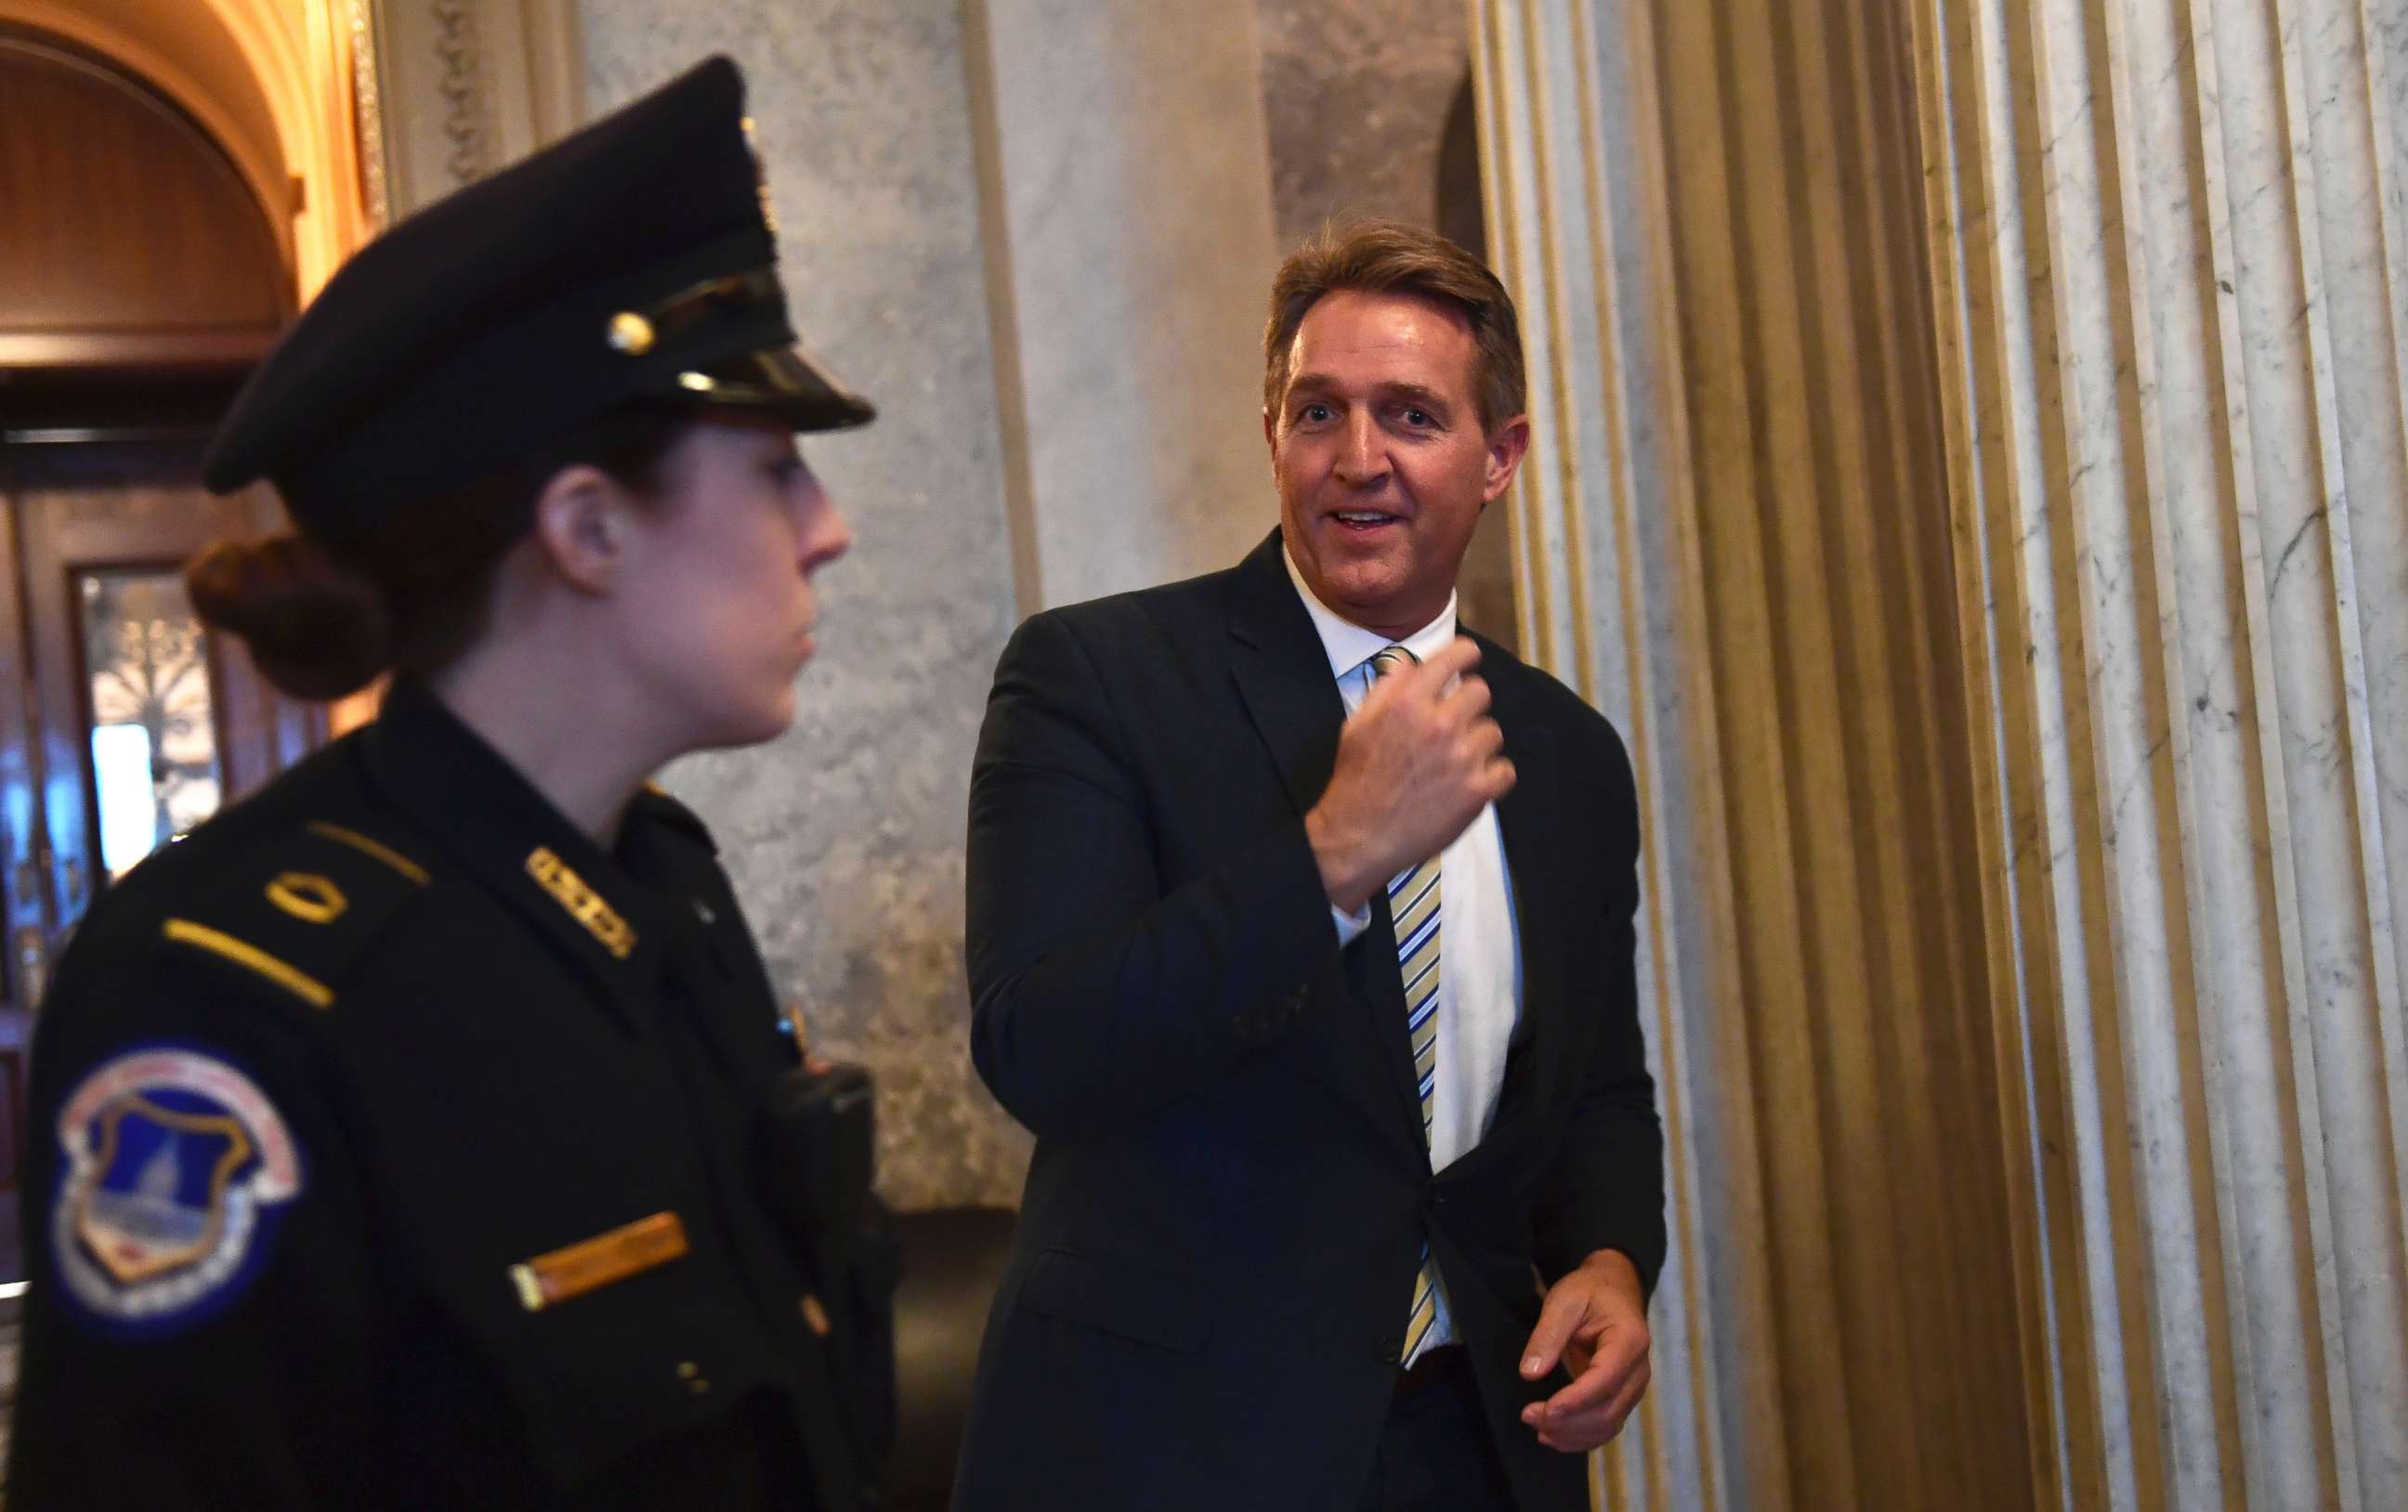 PHOTO: Sen. Jeff Flake walks on Capitol Hill on Dec. 5, 2017, following the weekly Republican policy luncheon.